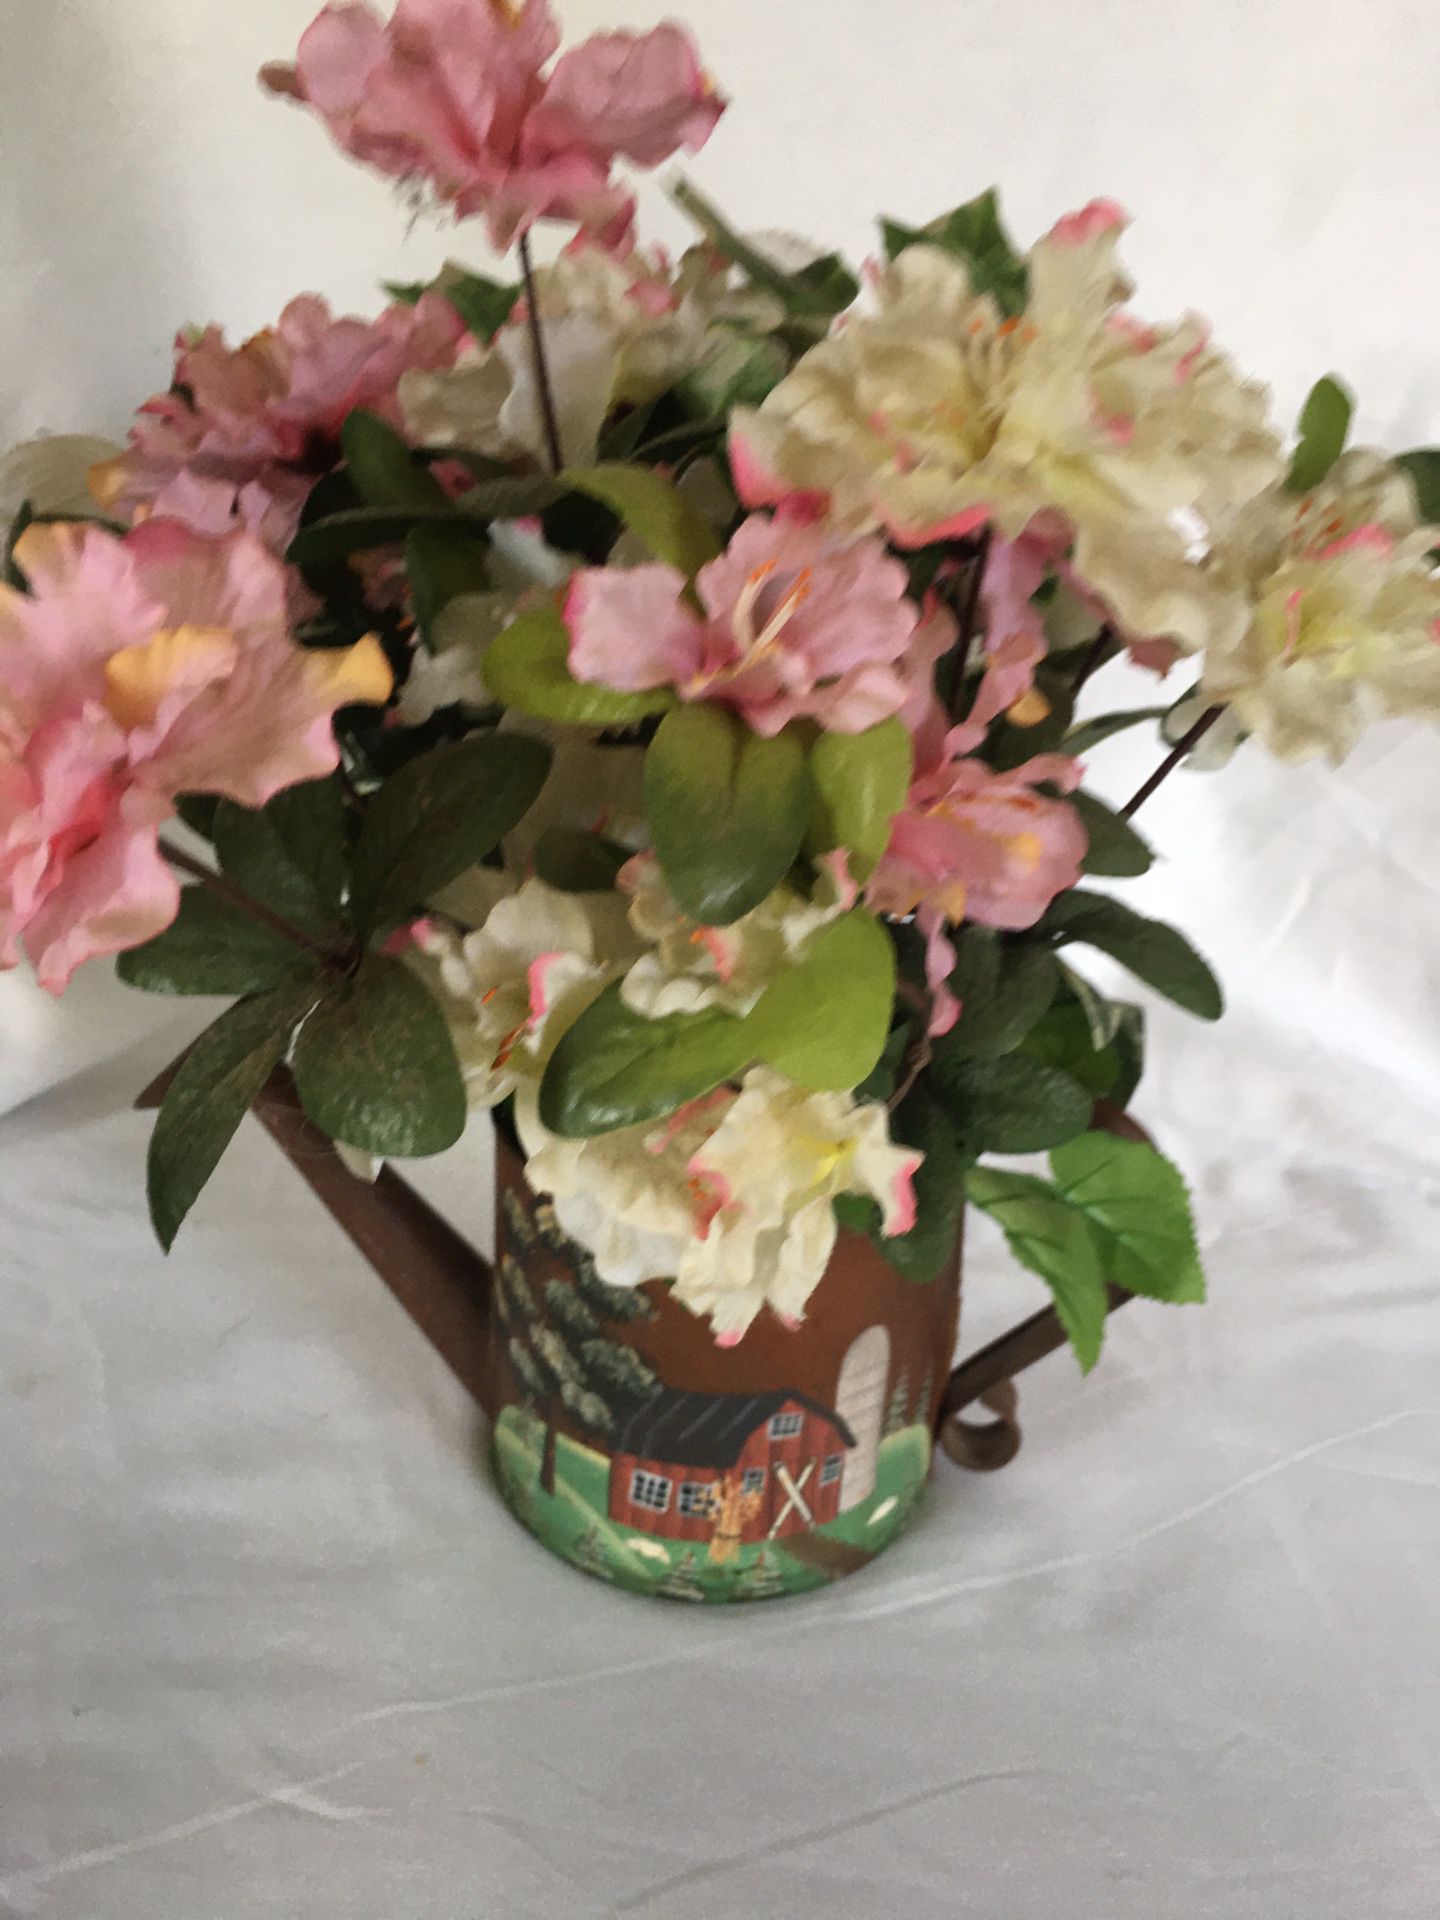 Reduced.METAL POT with pink flowers. Change to any color flowers.